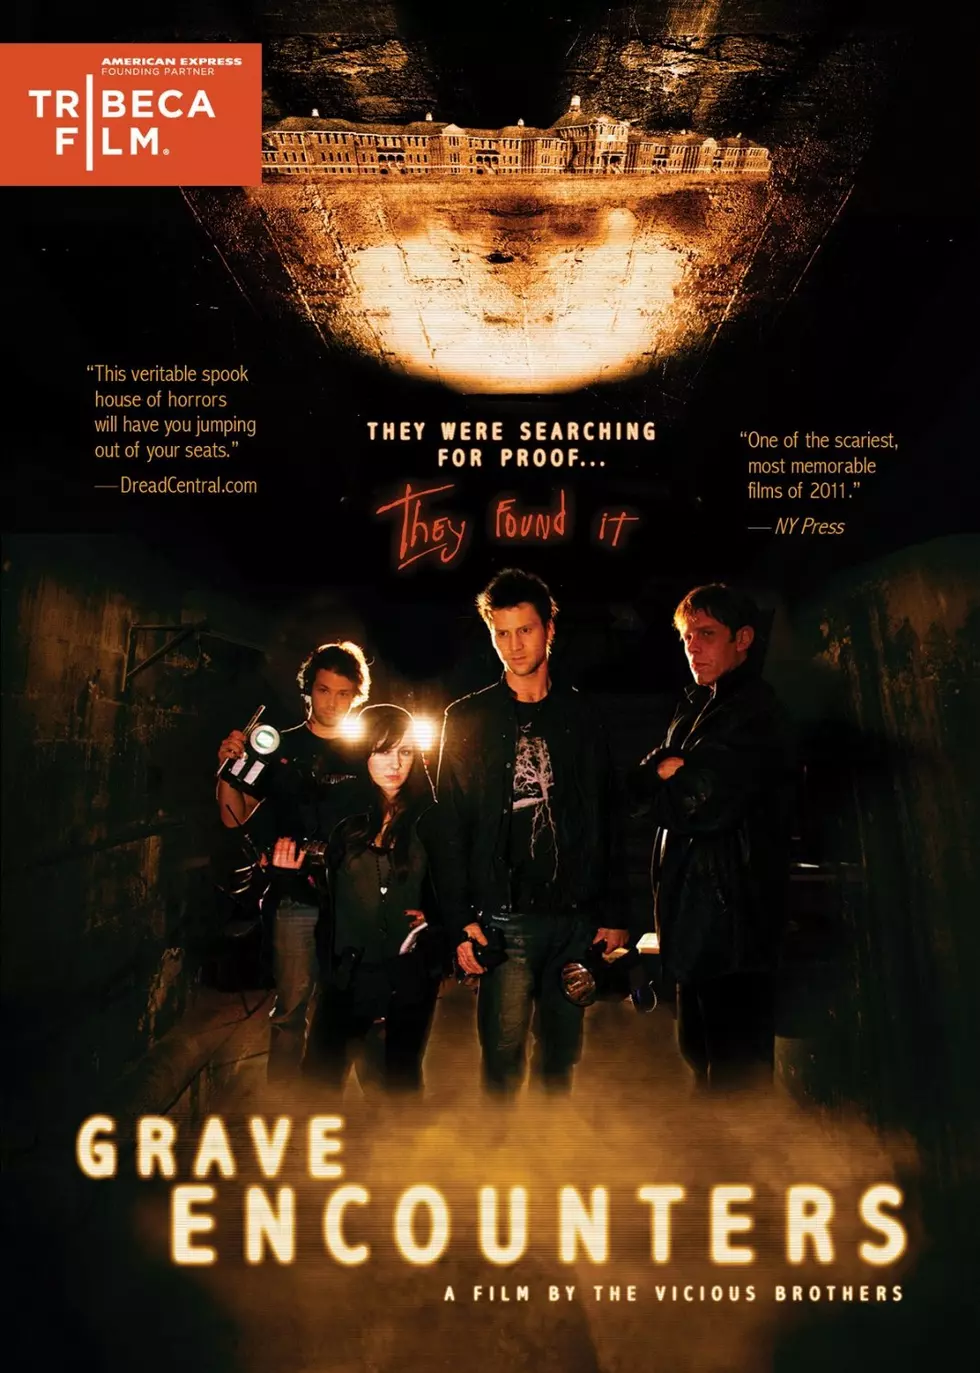 Day 14: Grave Encounters [Horror Film Review]